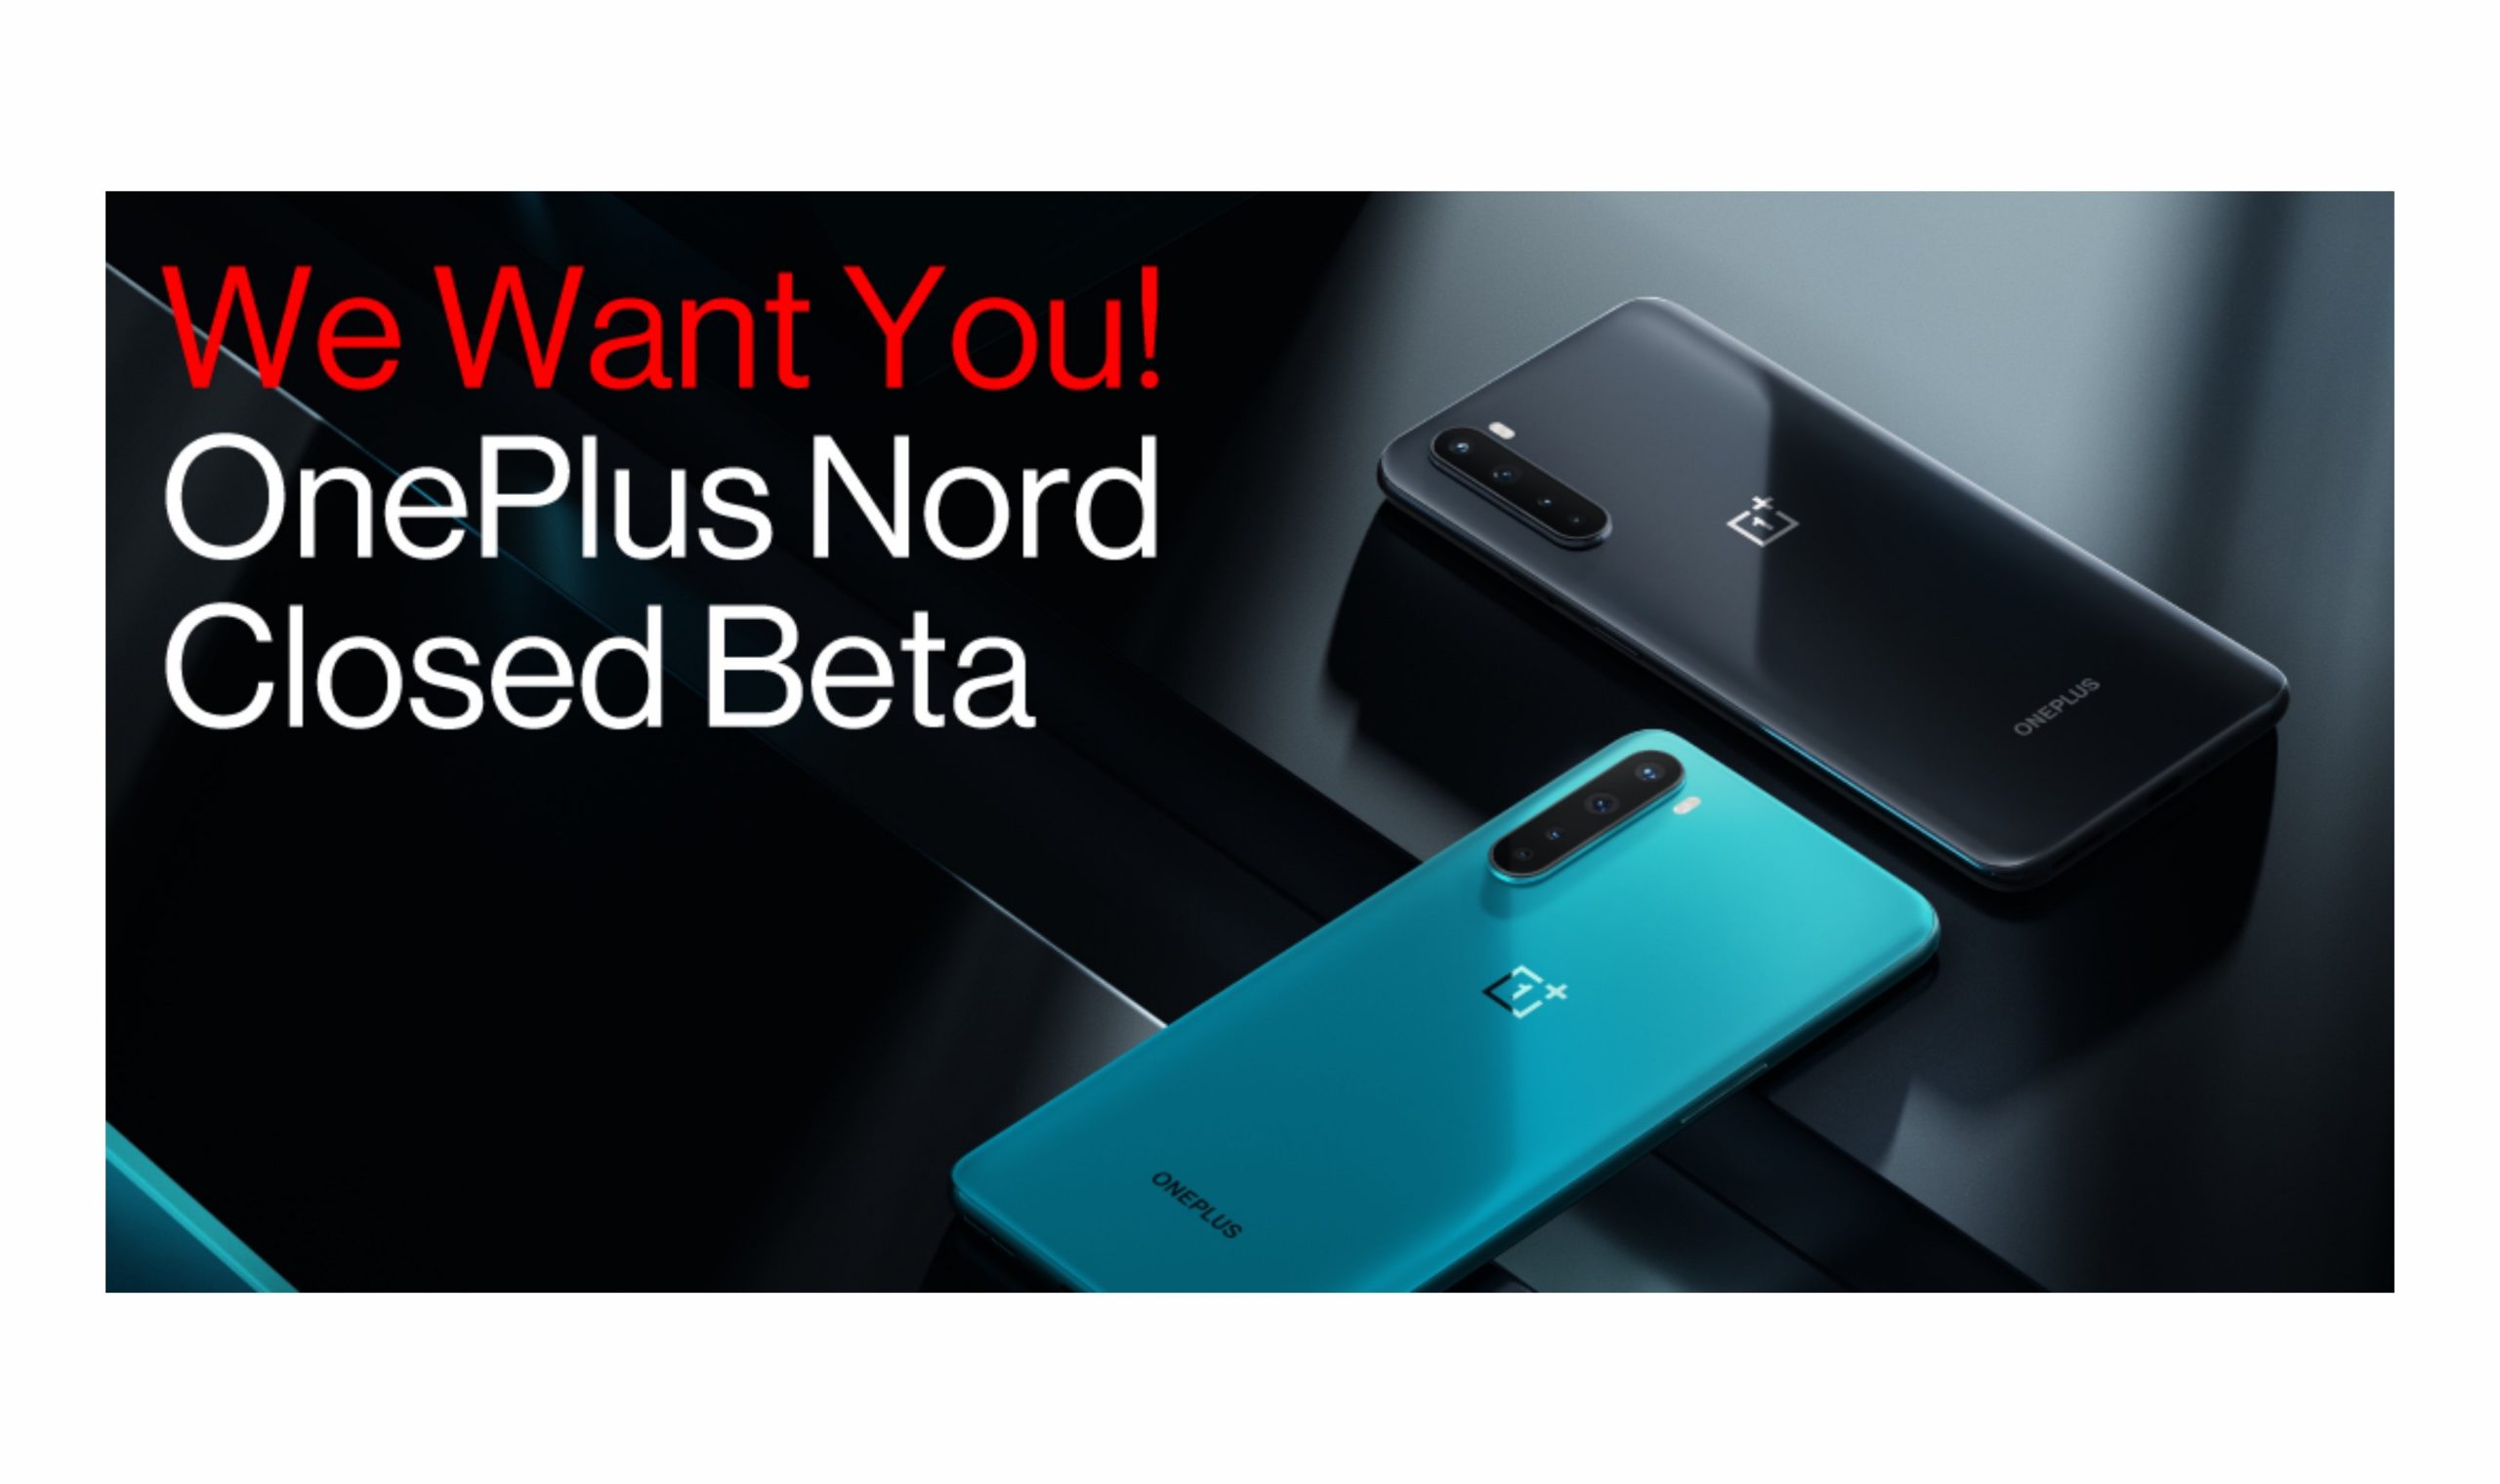 OnePlus starts recruiting testers for OnePlus Nord OxygenOS Closed Beta program